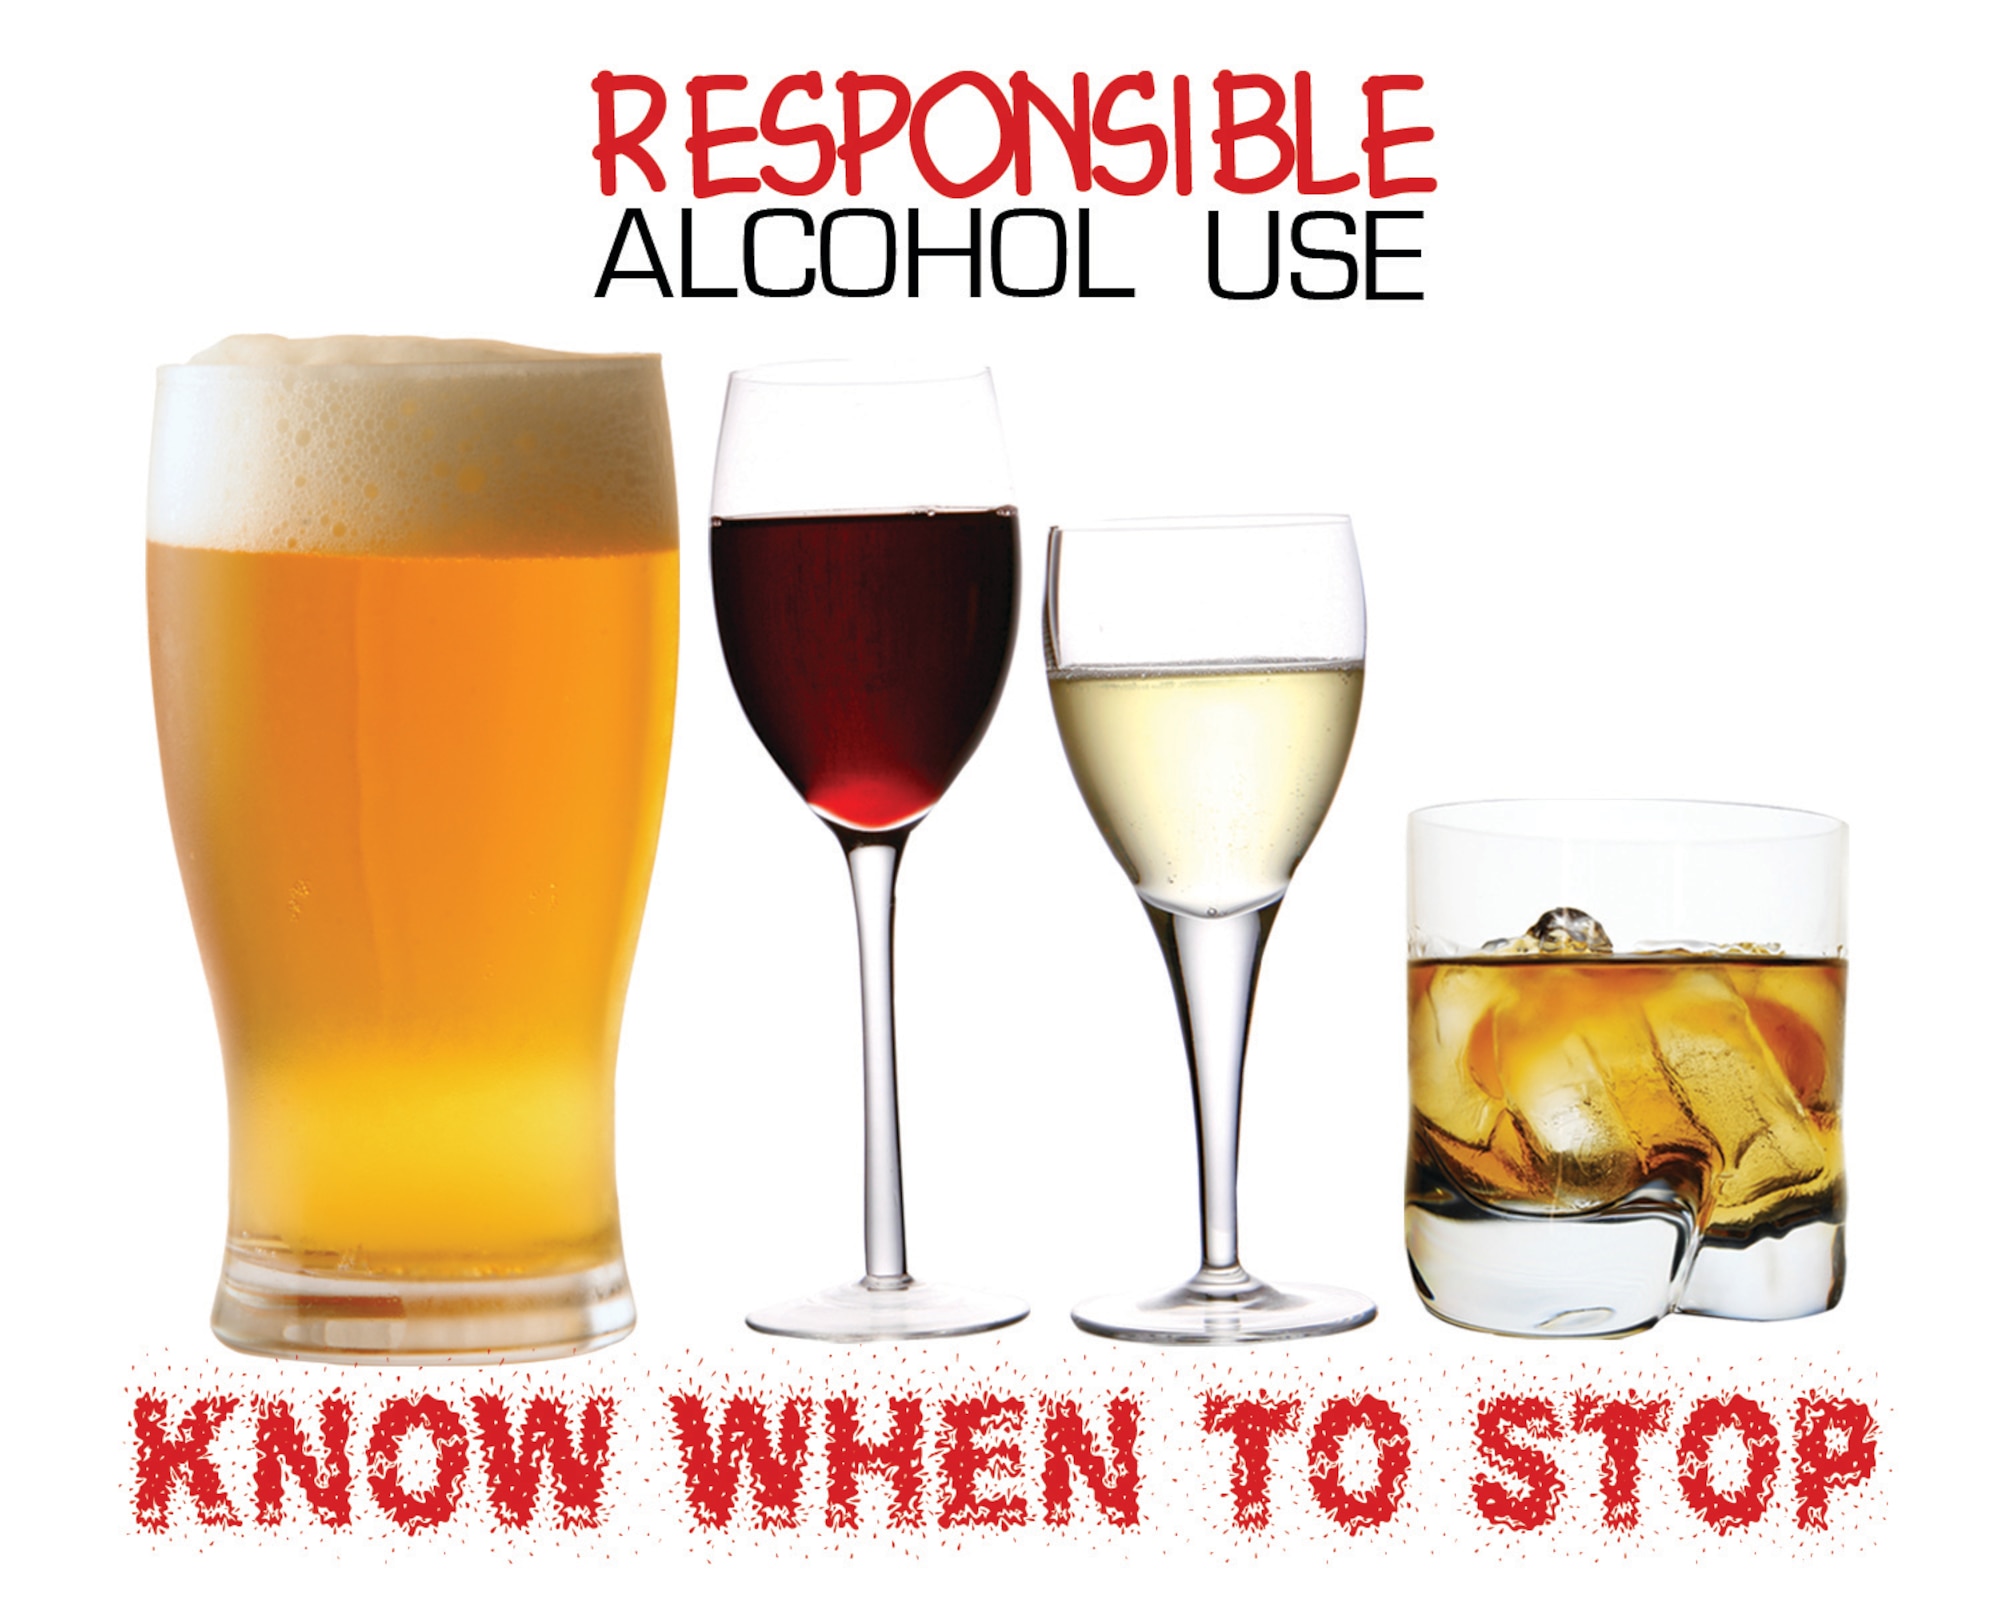 Always drink responsibly. April is Alcohol Awareness Month; the Air Force has also designated December as Responsible Alcohol Use Month. (U.S. Air Force graphic by Senior Airman Kristen Sauls)